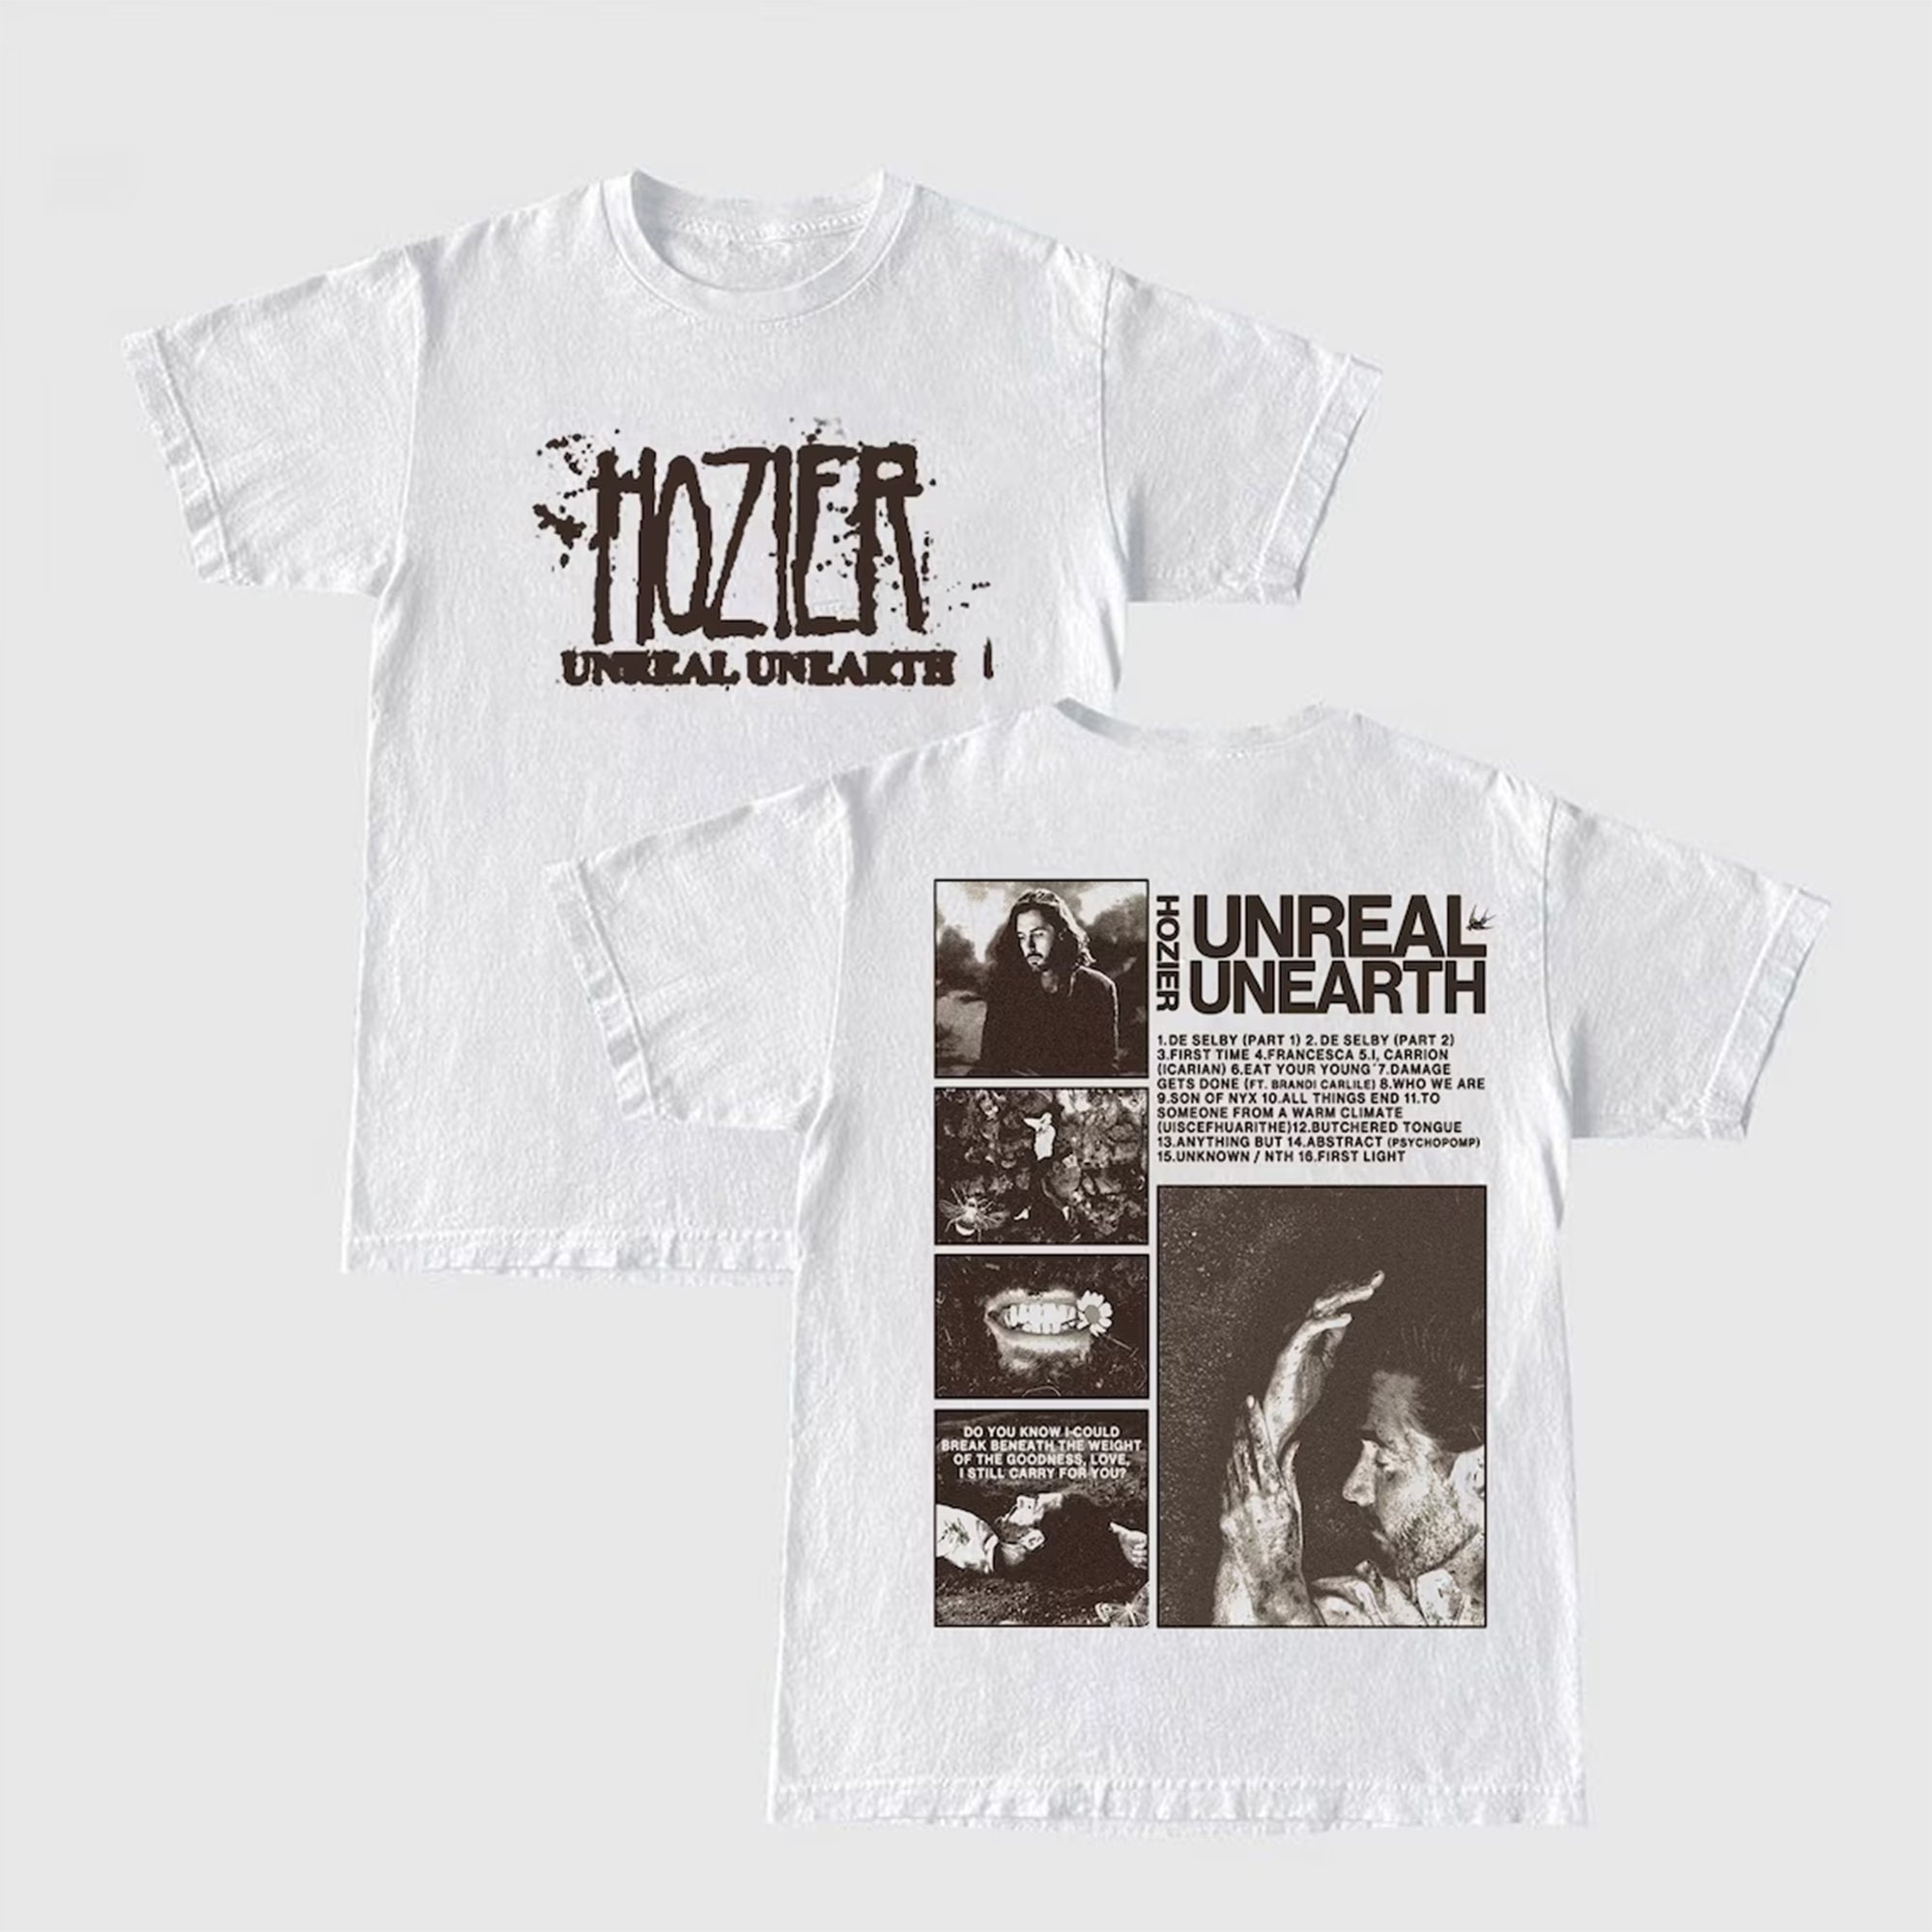 Hozier Unreal Unearth list Shirt, Hozier Music Shirt, No Grave Can Hold Down